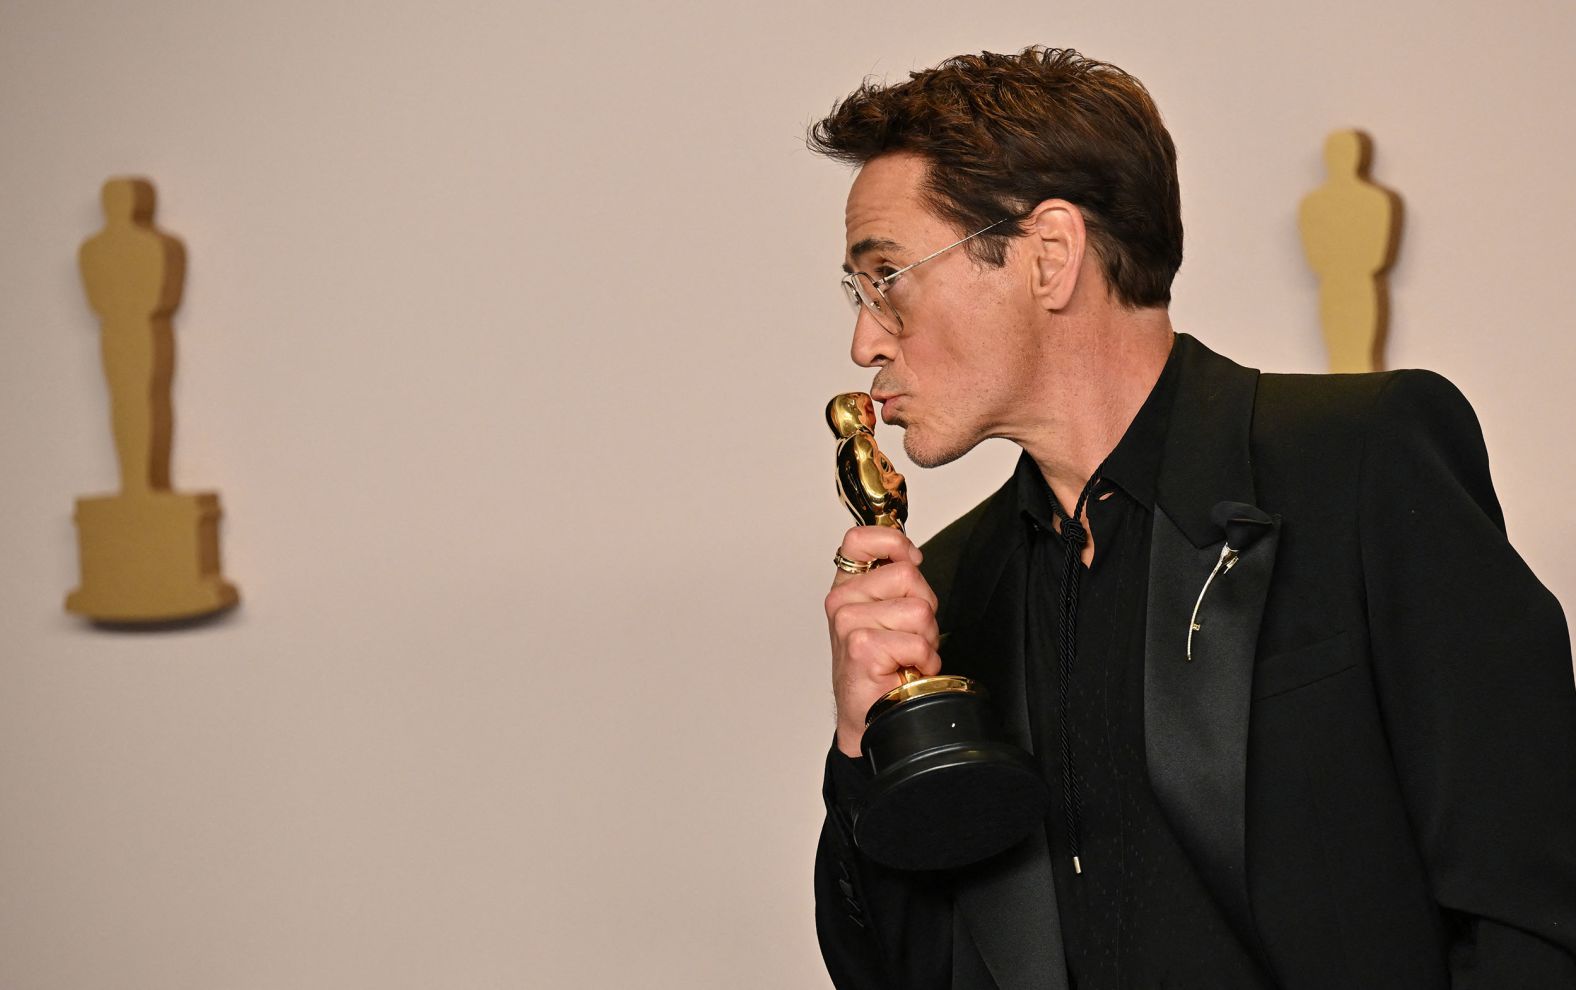 Robert Downey Jr. poses in the press room with the Oscar he won for best supporting actor. "I'd like to thank my terrible childhood and the Academy," <a href="index.php?page=&url=https%3A%2F%2Fwww.cnn.com%2Fentertainment%2Flive-news%2Foscars-academy-awards-03-10-24%2Fh_b112e2122ef918d2e30085505f824aae" target="_blank">he said in his acceptance speech</a>. "In that order."